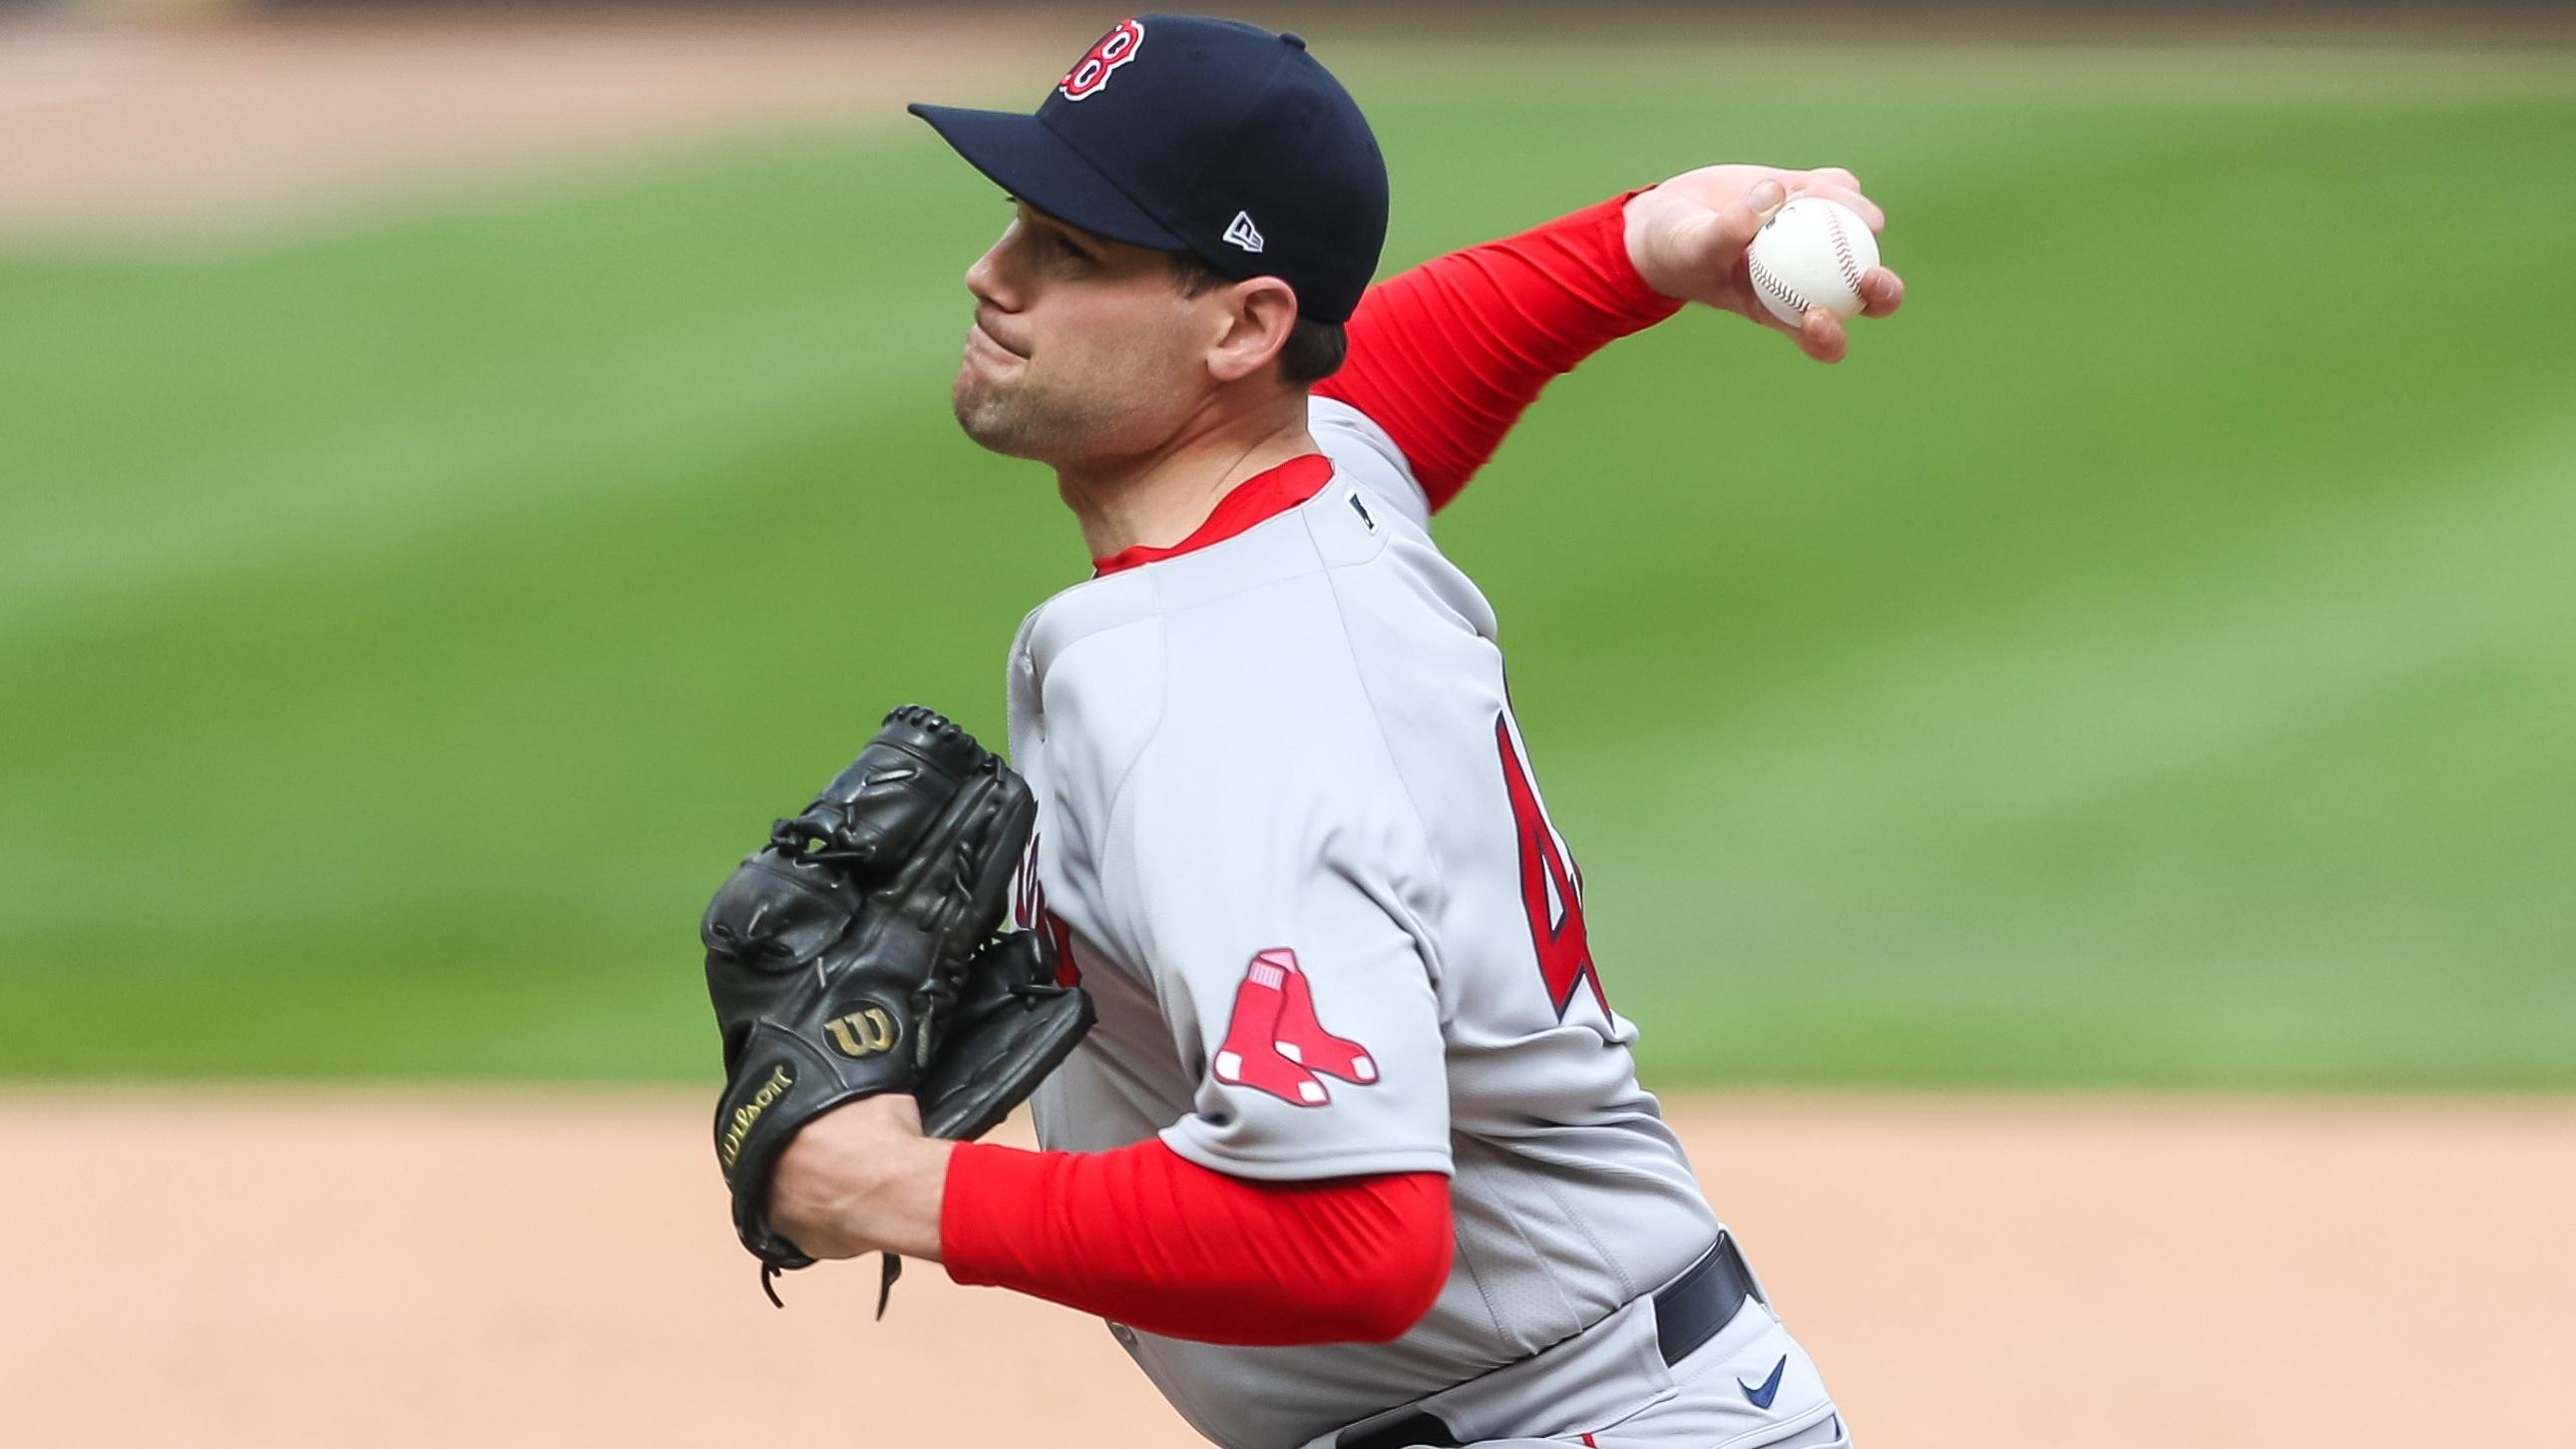 Apr 15, 2021; Minneapolis, Minnesota, USA; Boston Red Sox relief pitcher Adam Ottavino delivers a pitch against the Minnesota Twins in the ninth inning at Target Field. / David Berding-USA TODAY Sports